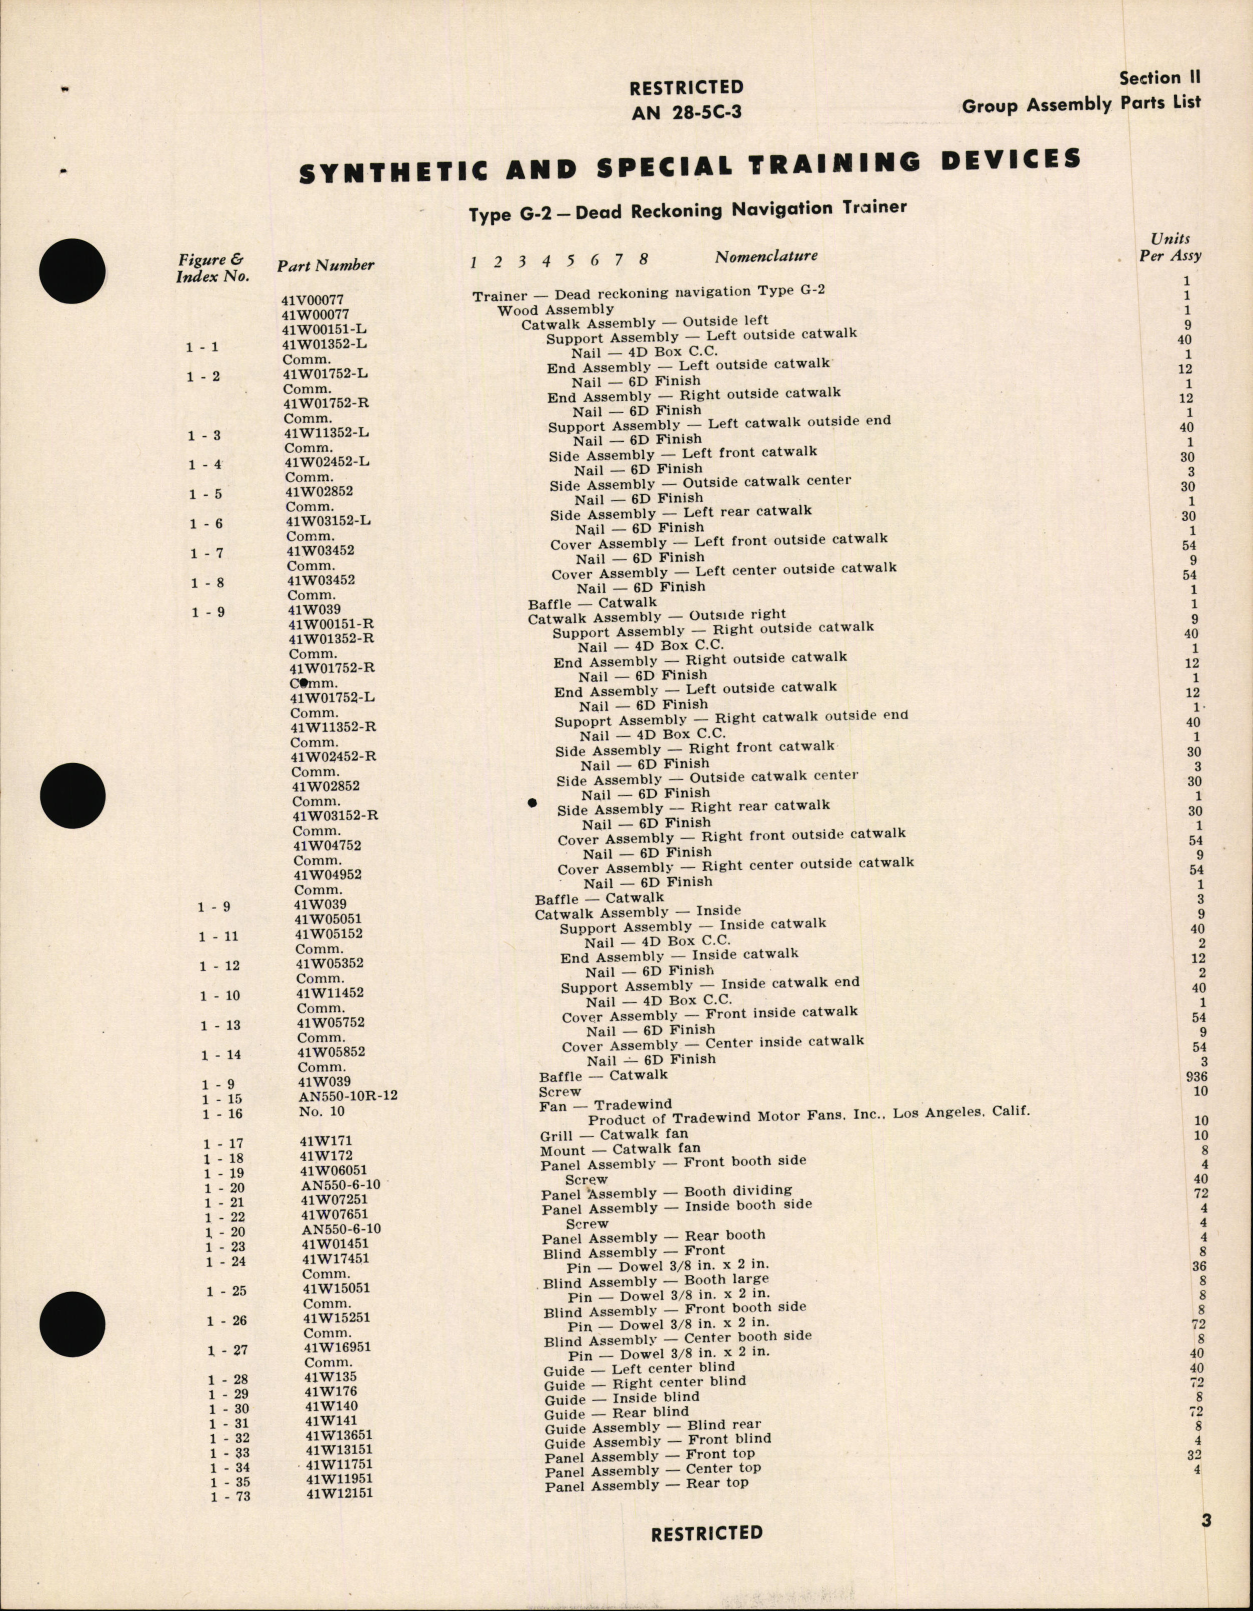 Sample page 7 from AirCorps Library document: Parts Catalog for Dead Reckoning Navigation Trainer Type G-2